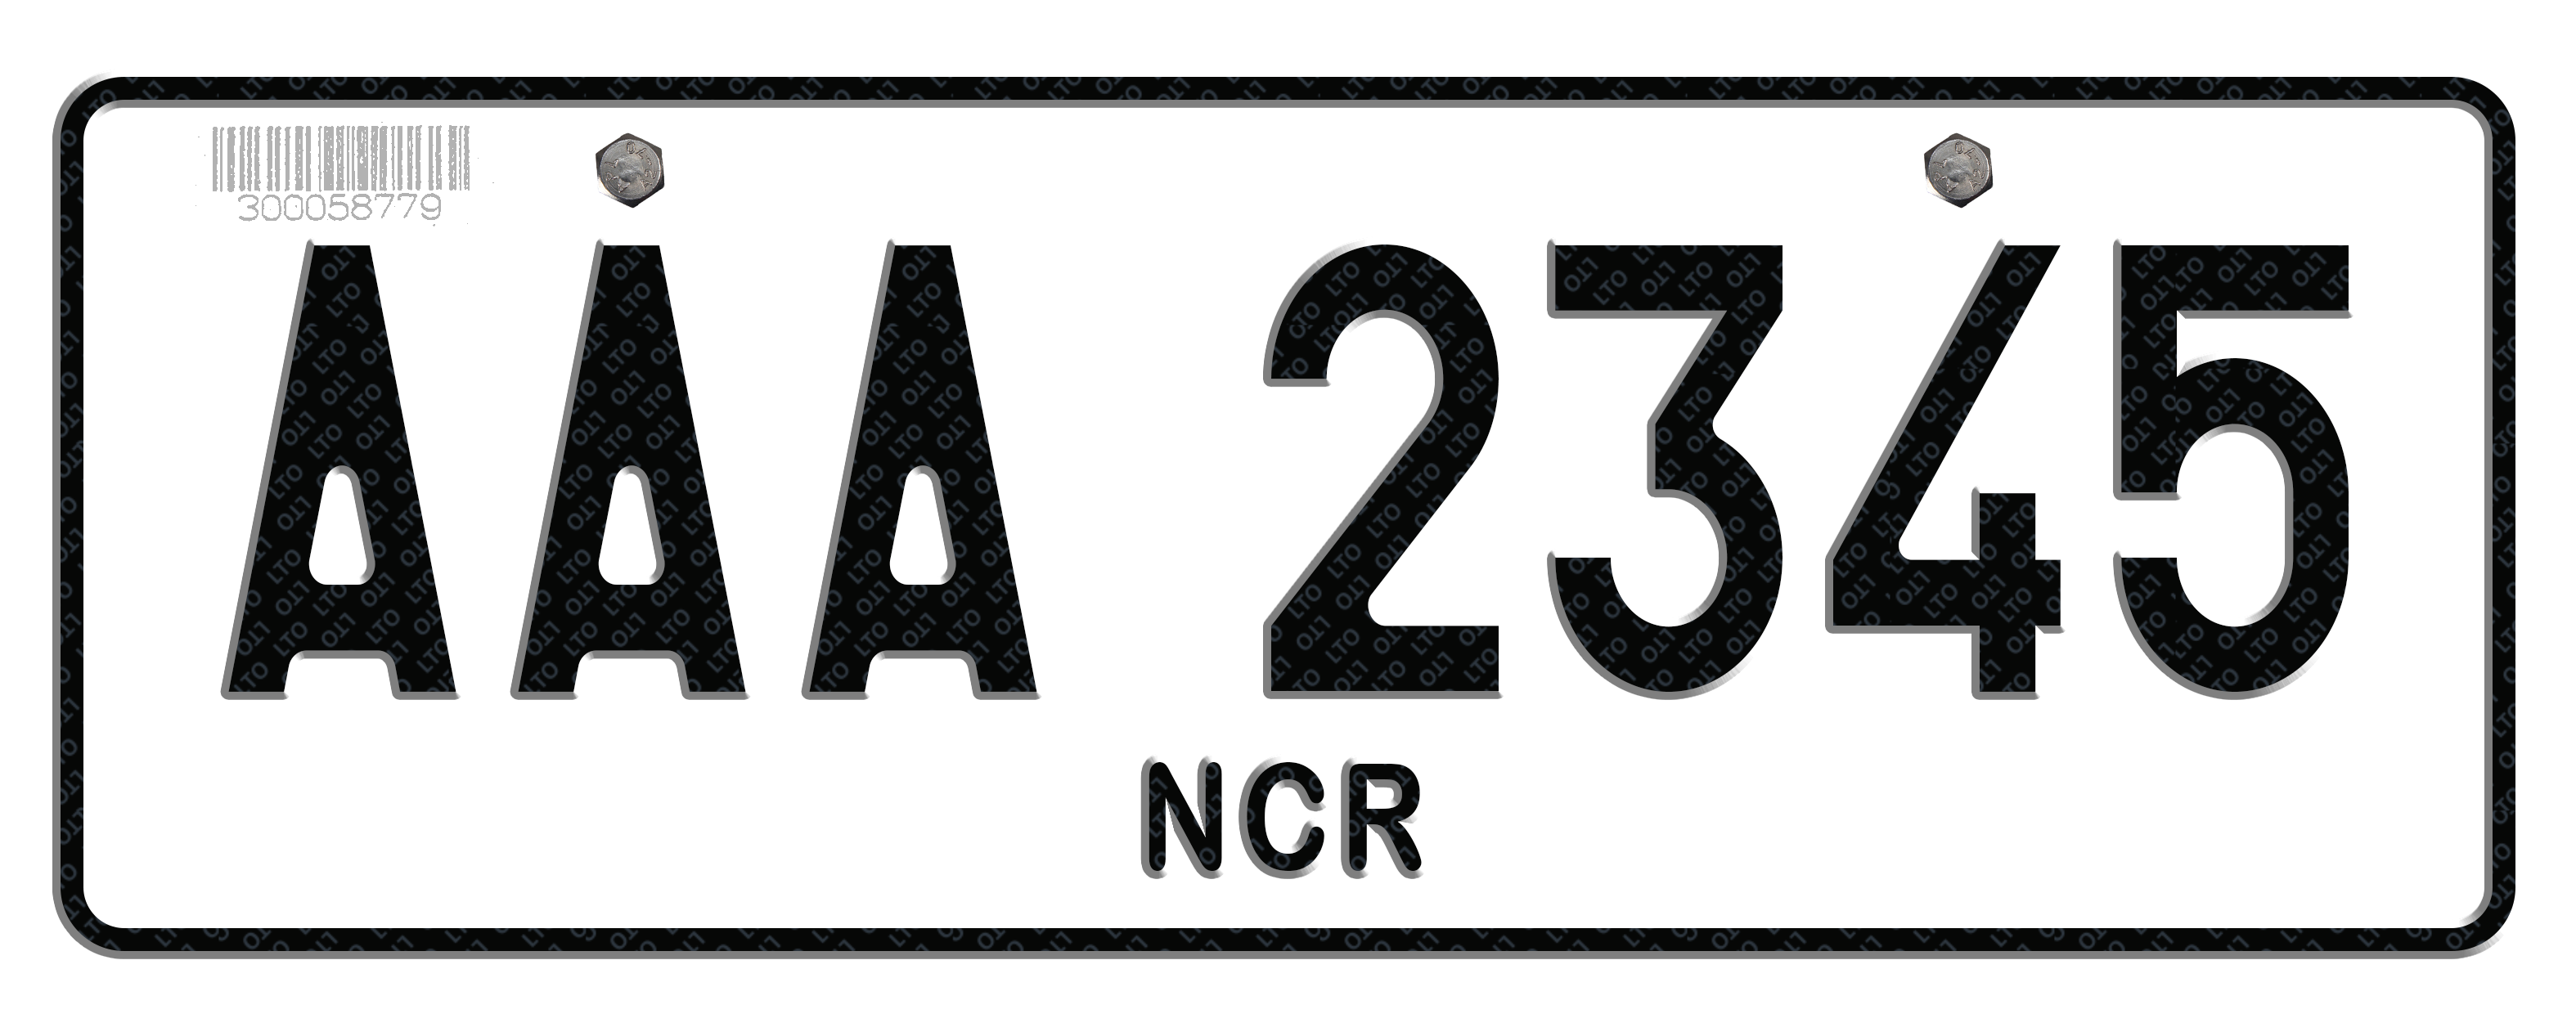 File:2014 Philippines Plate.png - Wikipedia